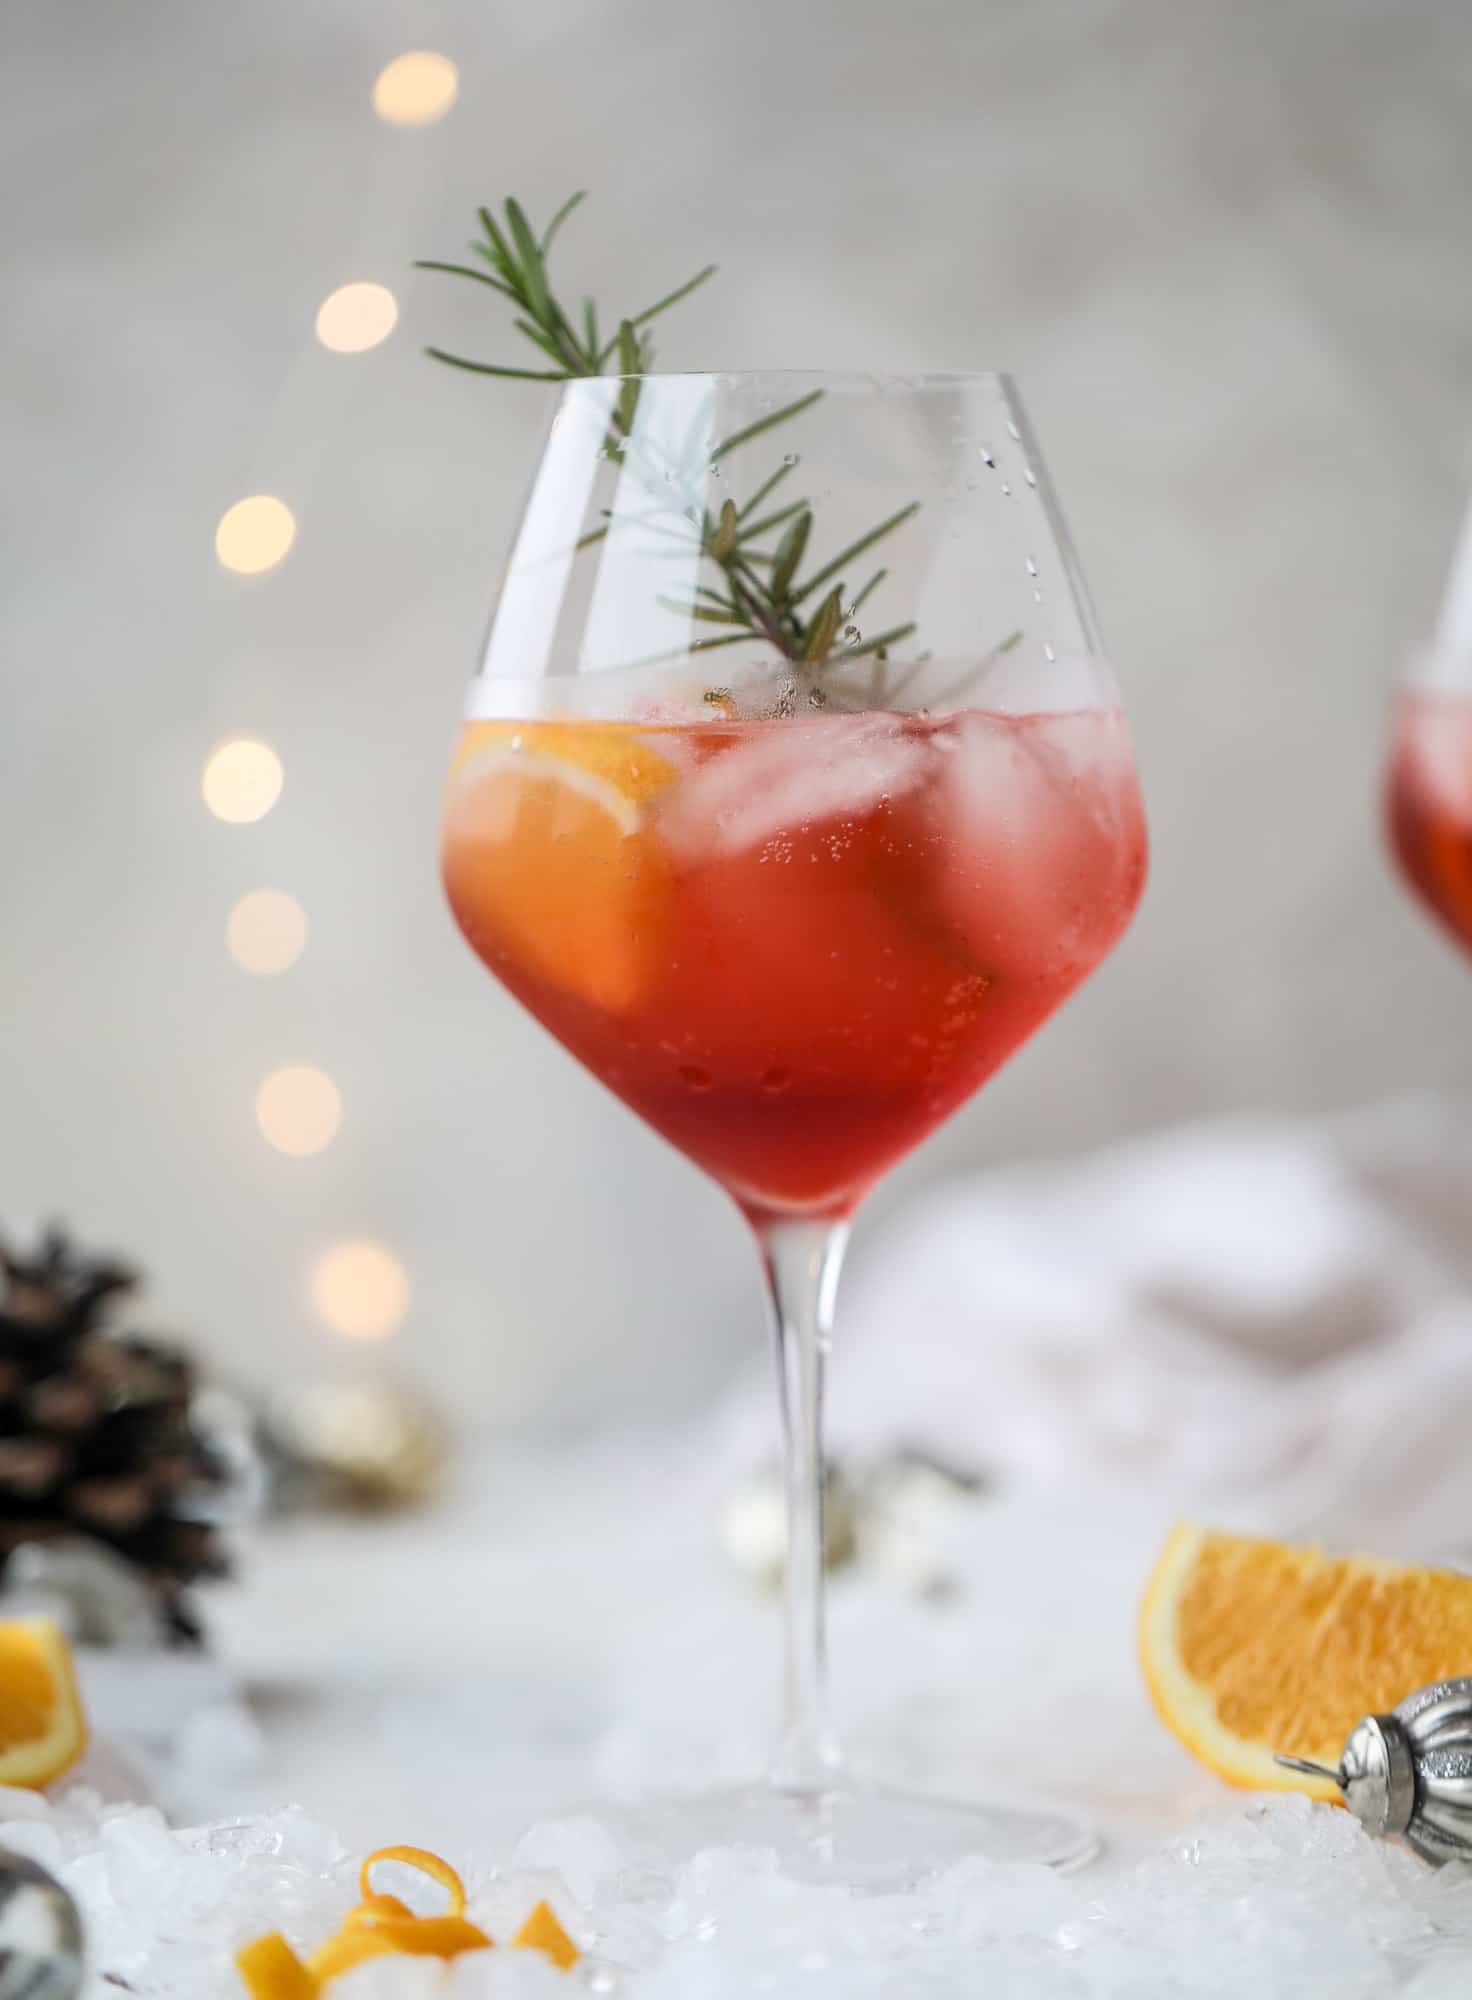 This winter aperol spritz cocktail is a seasonal spin on the classic aperol spritz! Festive cranberry and classic orange come together with prosecco and club soda to create a super light and refreshing cocktail for the holidays! I howsweeteats.com #aperol #spritz